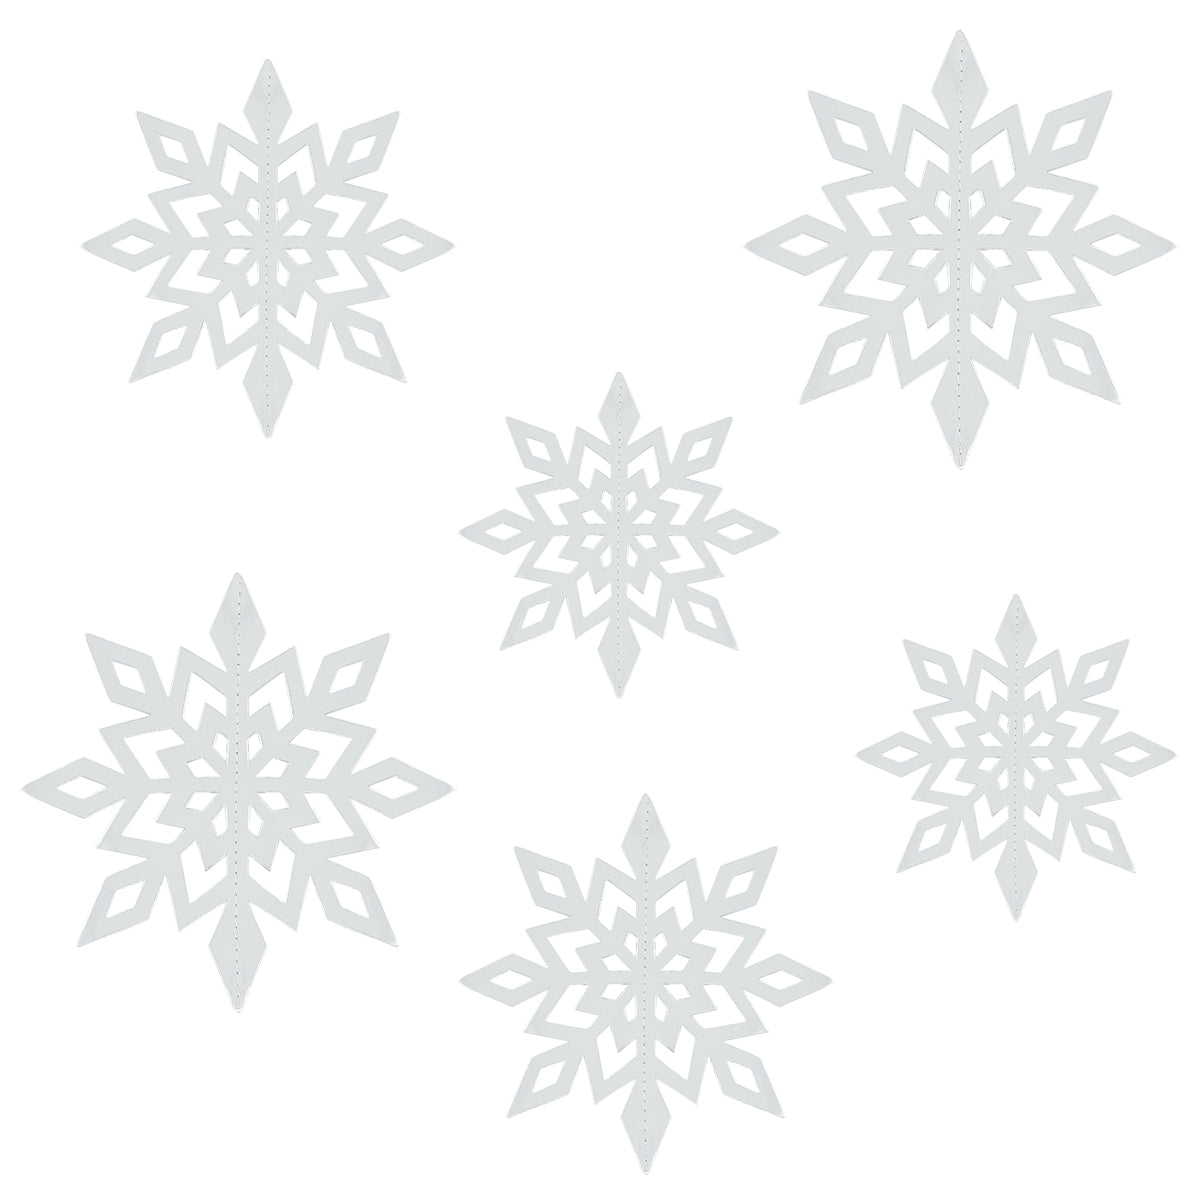 Bulk Pack of 24-Star Shape Clear Plastic Christmas Ornaments 65mm (2-1/2  Inch) -Great for DIY Crafts, Wedding Party Favors